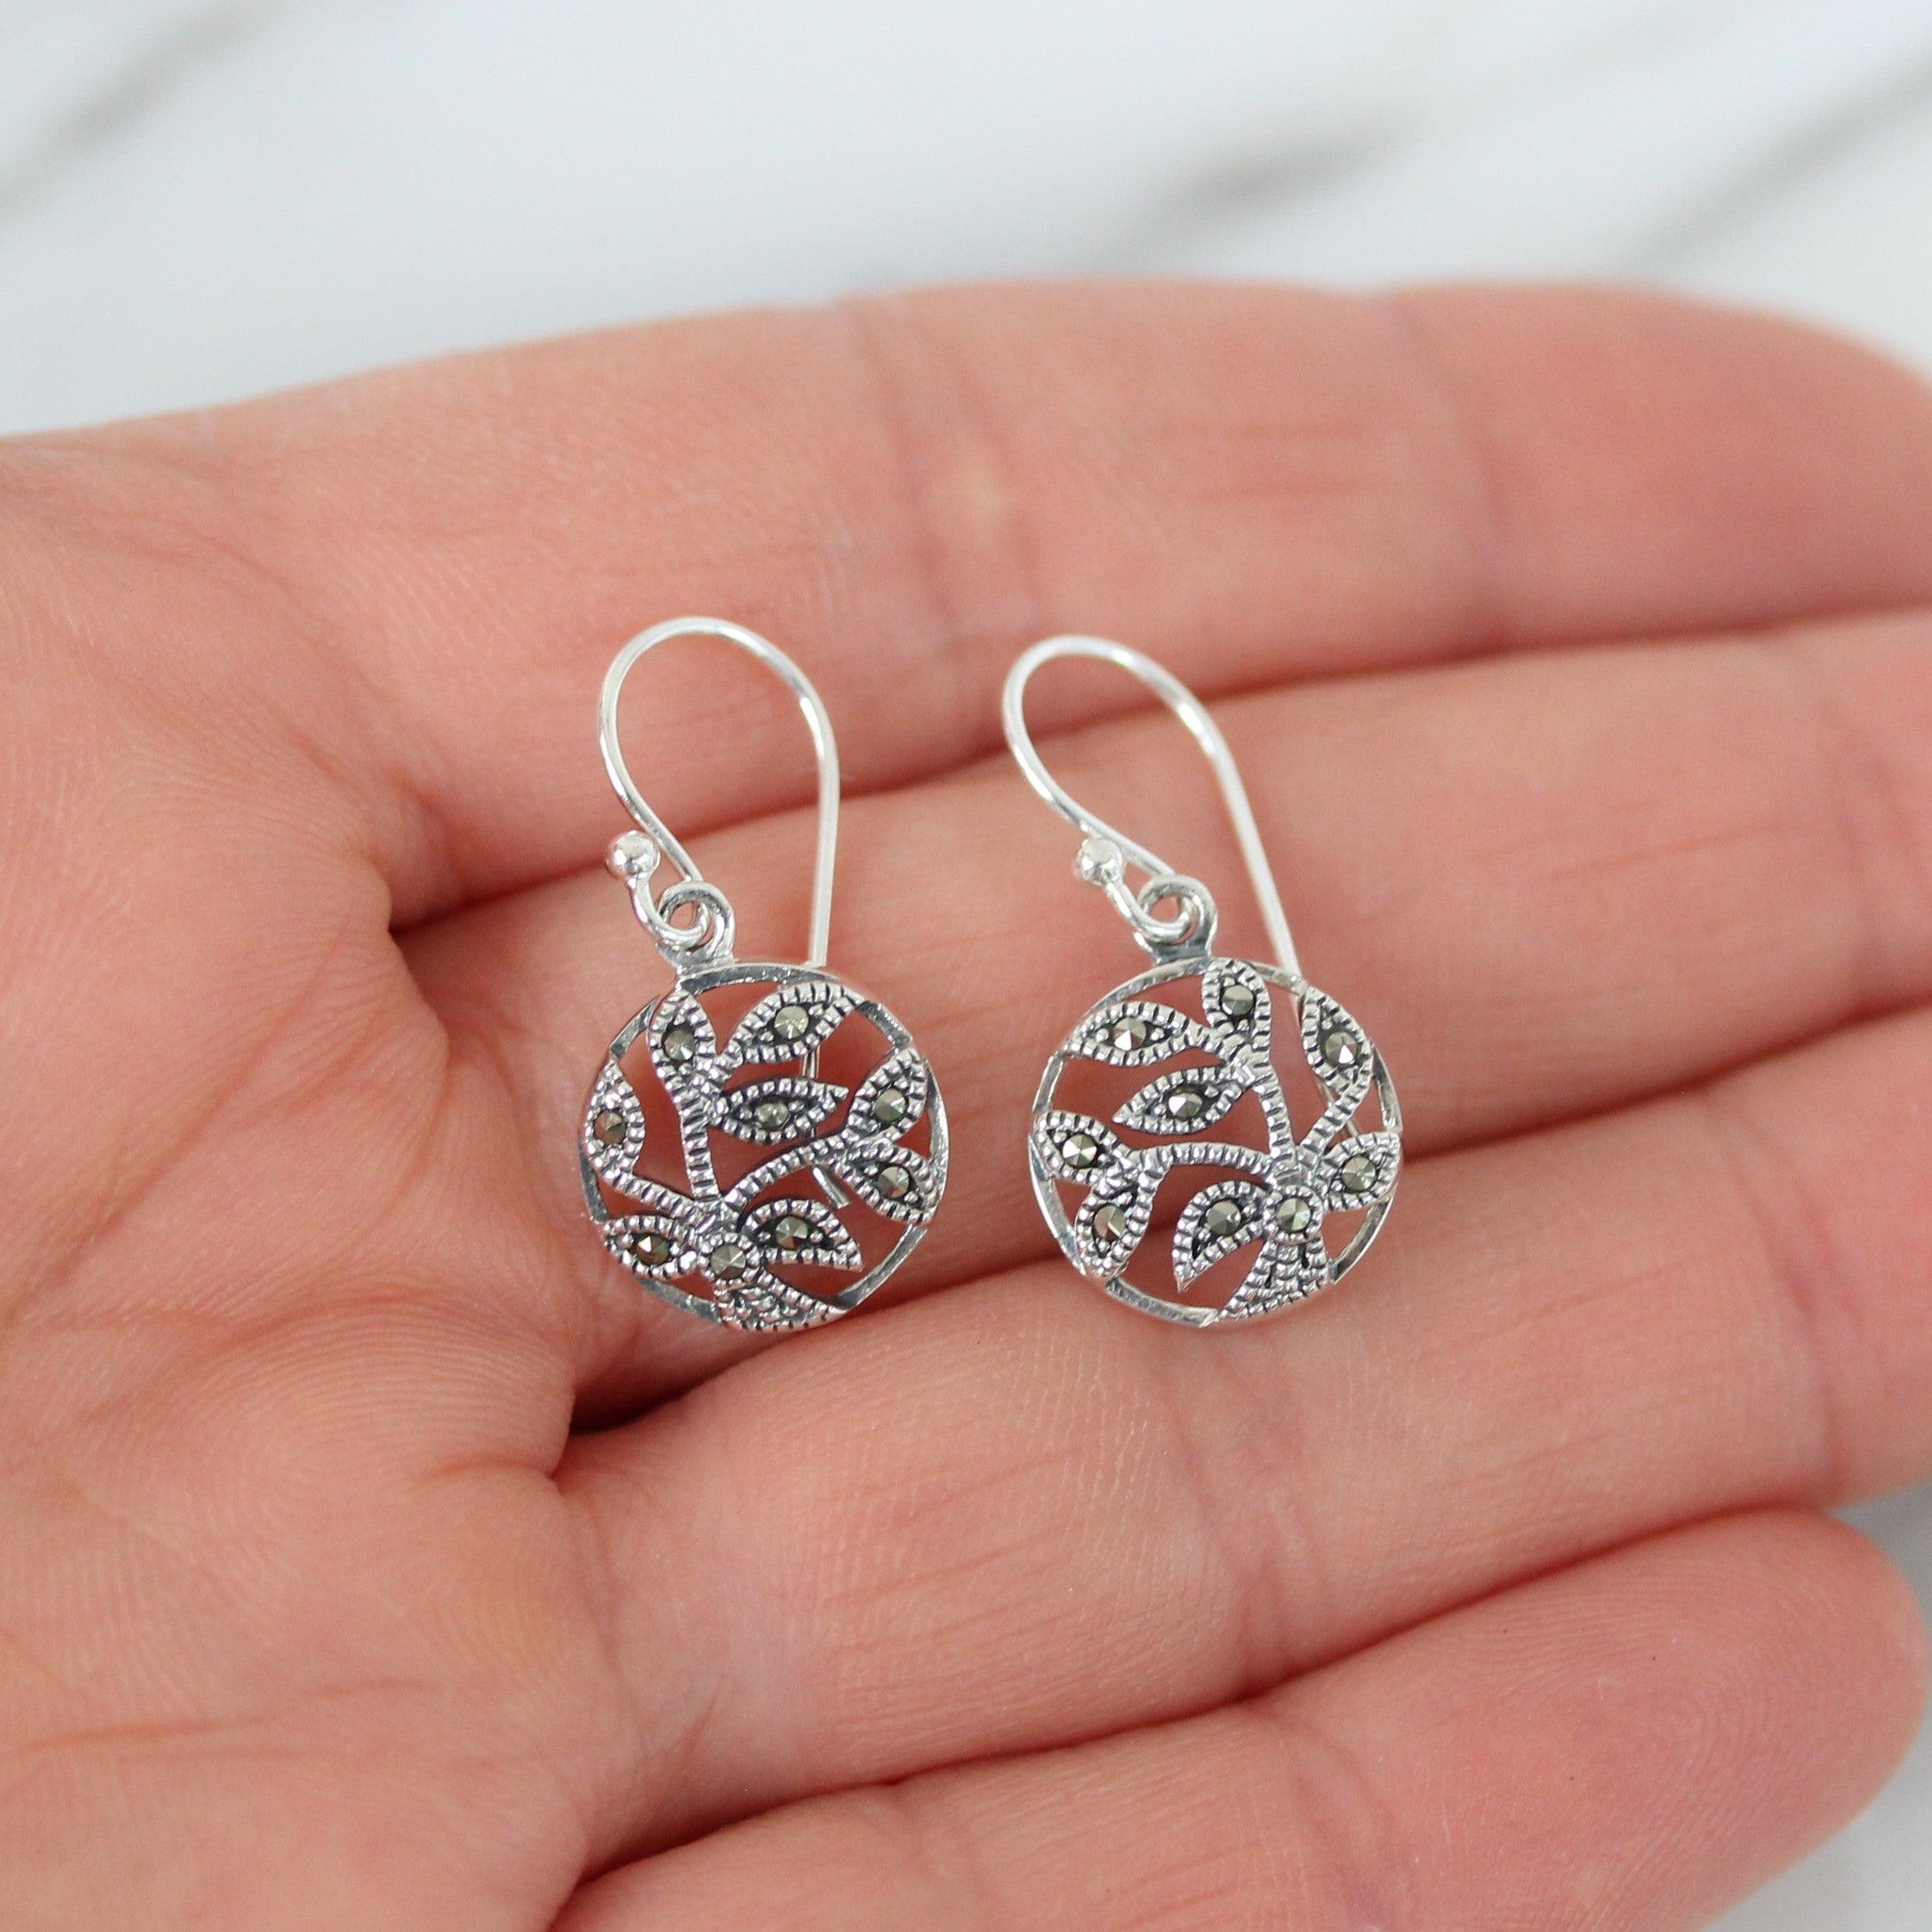 Sterling Silver Marcasite 12mm Round Floral Leverback Drop Earrings - STERLING SILVER DESIGNS